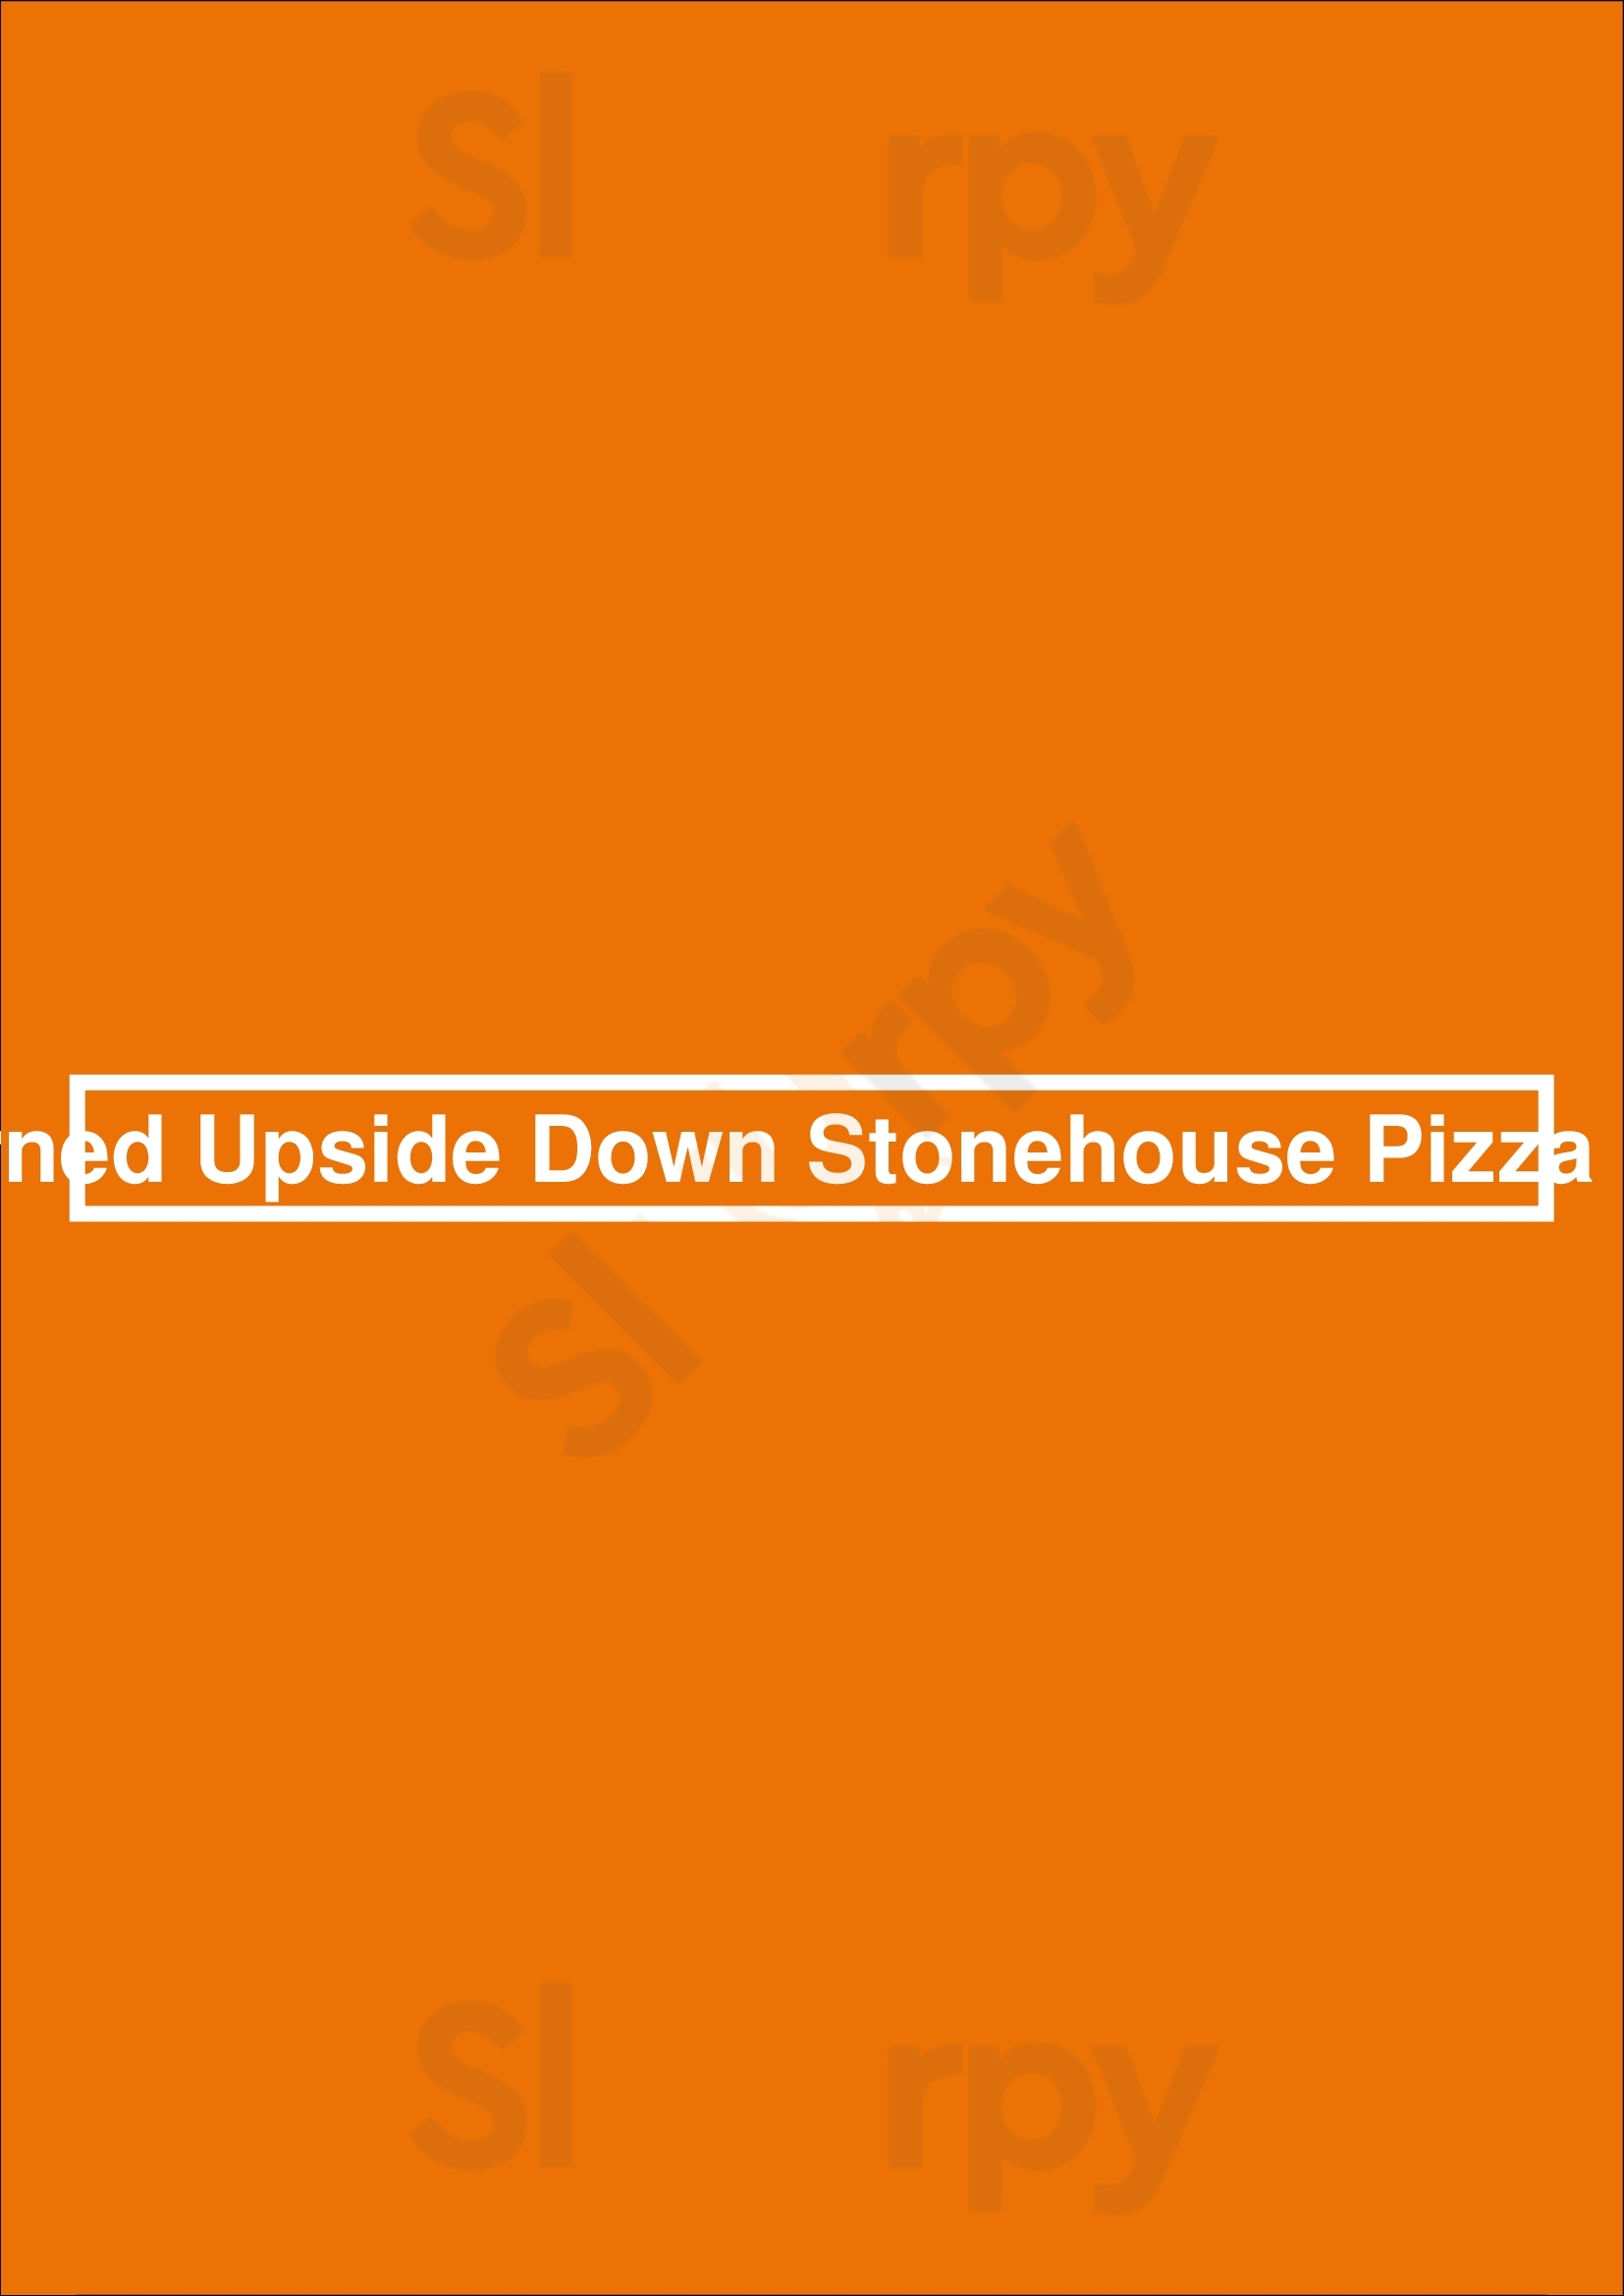 World Turned Upside Down Stonehouse Pizza & Carvery Reading Menu - 1